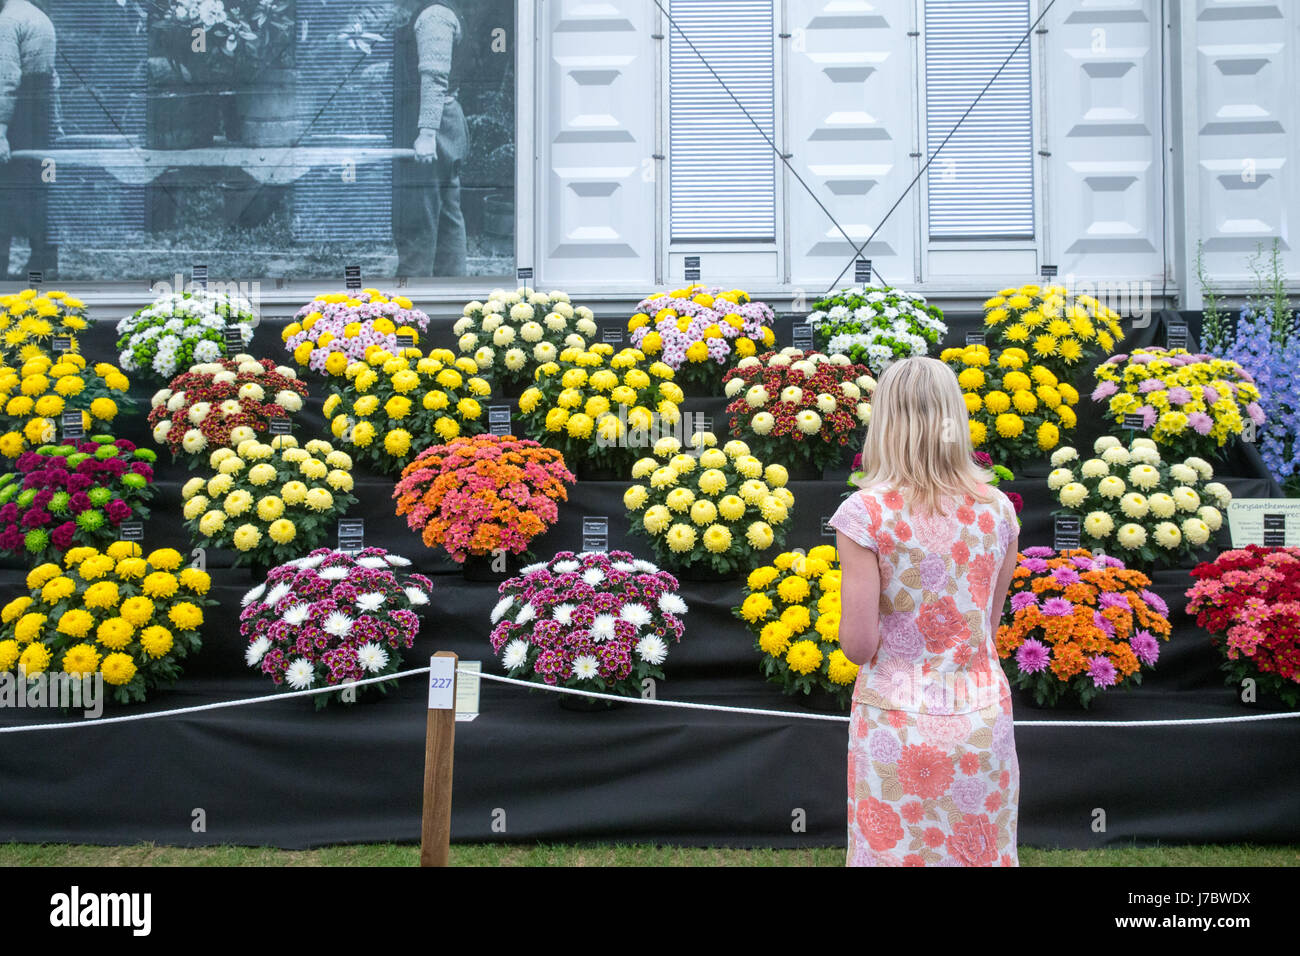 A woman with a floral dress studies a display of Chrysanthemums in the Great Pavilion at the Chelsea Flower Show Stock Photo